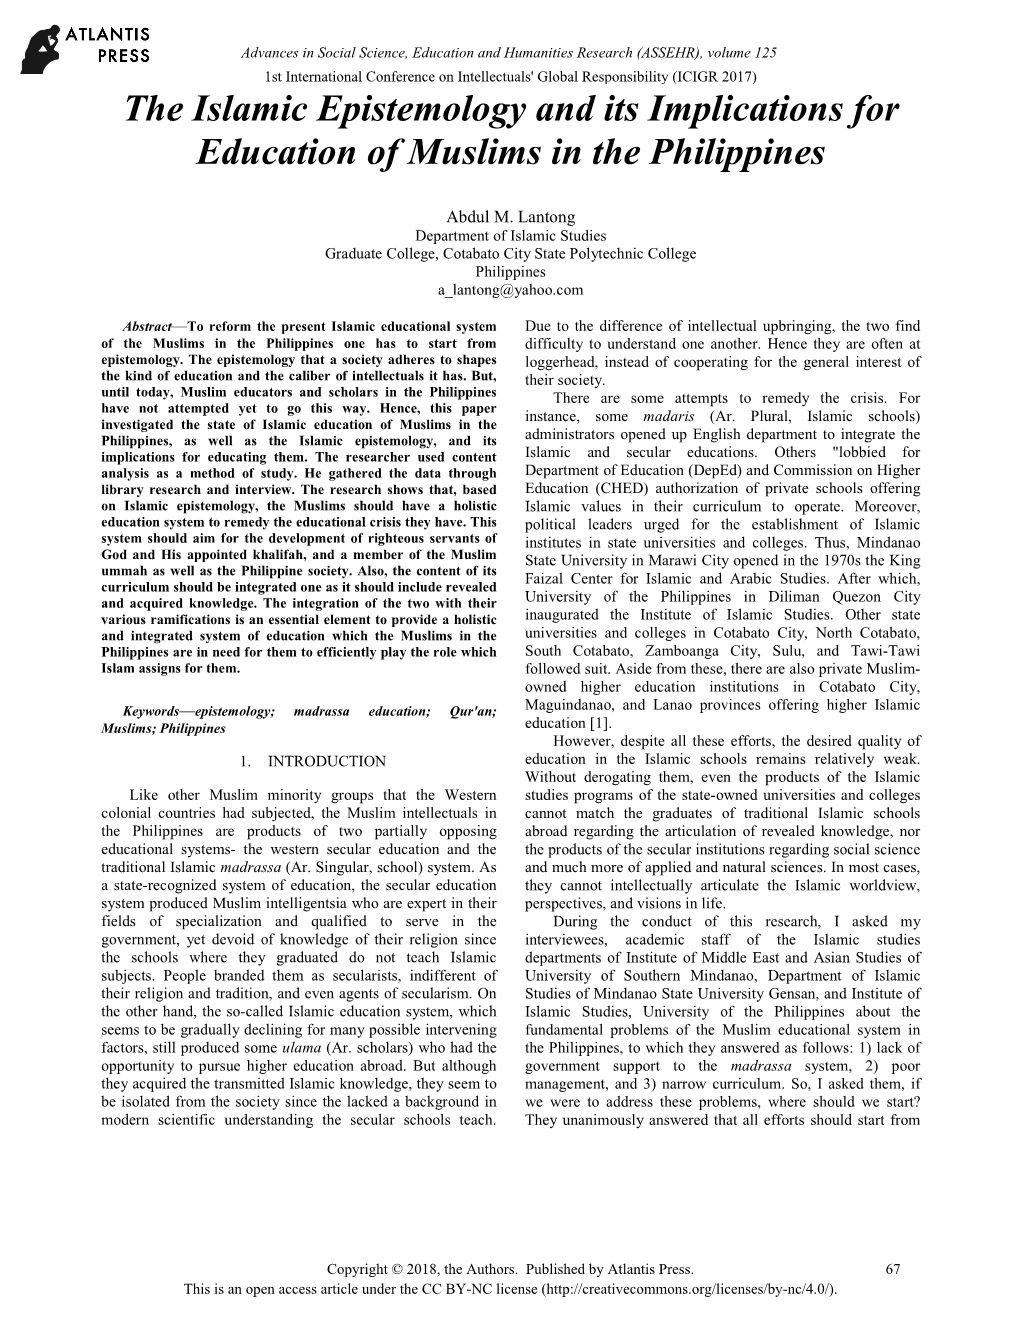 The Islamic Epistemology and Its Implications for Education of Muslims in the Philippines